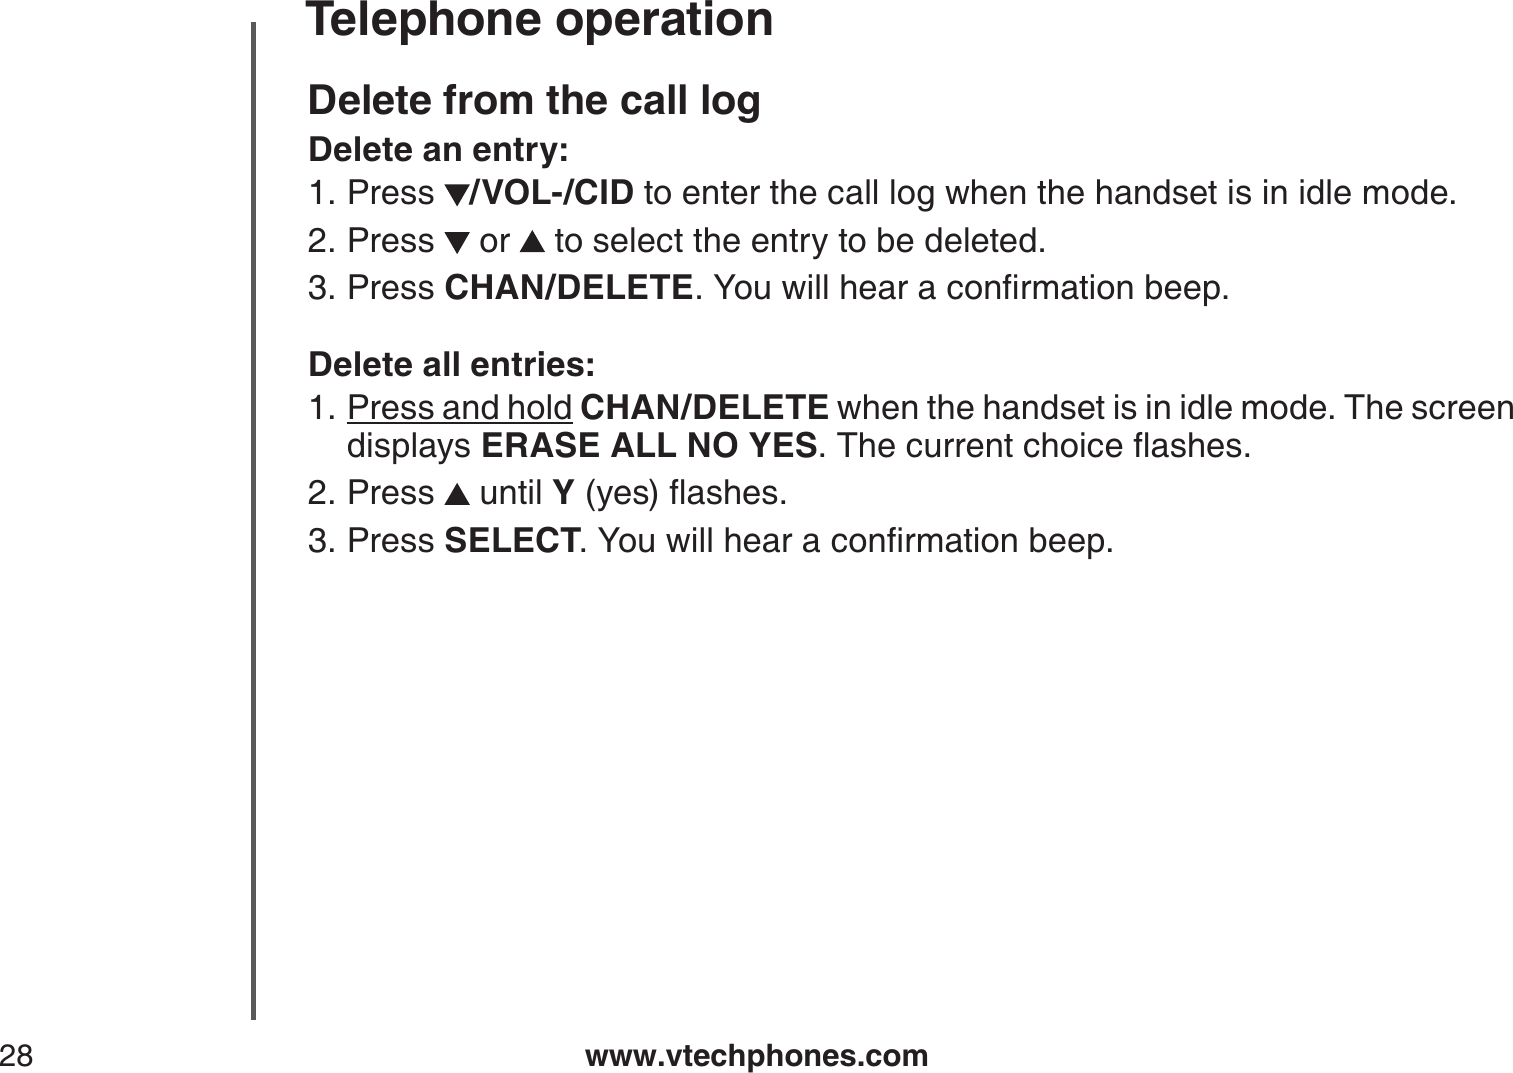 www.vtechphones.com28Telephone operationDelete from the call logDelete an entry:Press /VOL-/CID to enter the call log when the handset is in idle mode. Press   or   to select the entry to be deleted.Press CHAN/DELETE;QWYKNNJGCTCEQPſTOCVKQPDGGRDelete all entries:Press and hold CHAN/DELETE when the handset is in idle mode. The screen displays ERASE ALL NO YES6JGEWTTGPVEJQKEGƀCUJGUPress   until Y[GUƀCUJGUPress SELECT;QWYKNNJGCTCEQPſTOCVKQPDGGR1.2.3.1.2.3.